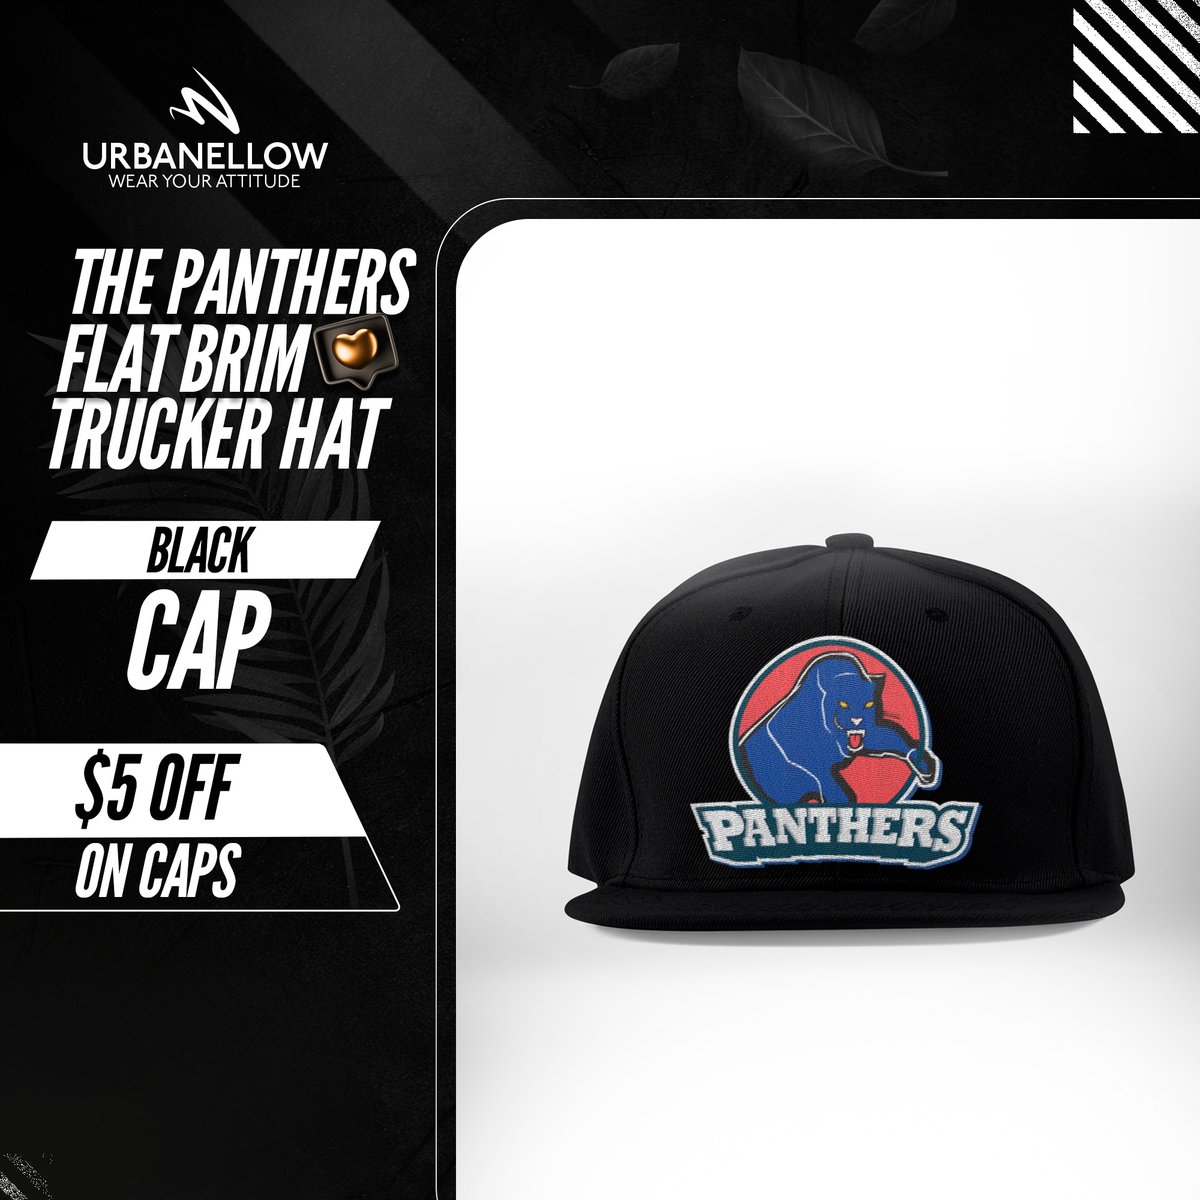 Limited Time Offer!
* GET $5 OFF on all caps

Be wild wearing this panthers cap.

Order Now!
urbanellow.com/products/panth…

#Urbanellow #Call #Baseball #Men #Women #Fashion #Trending #casualwear